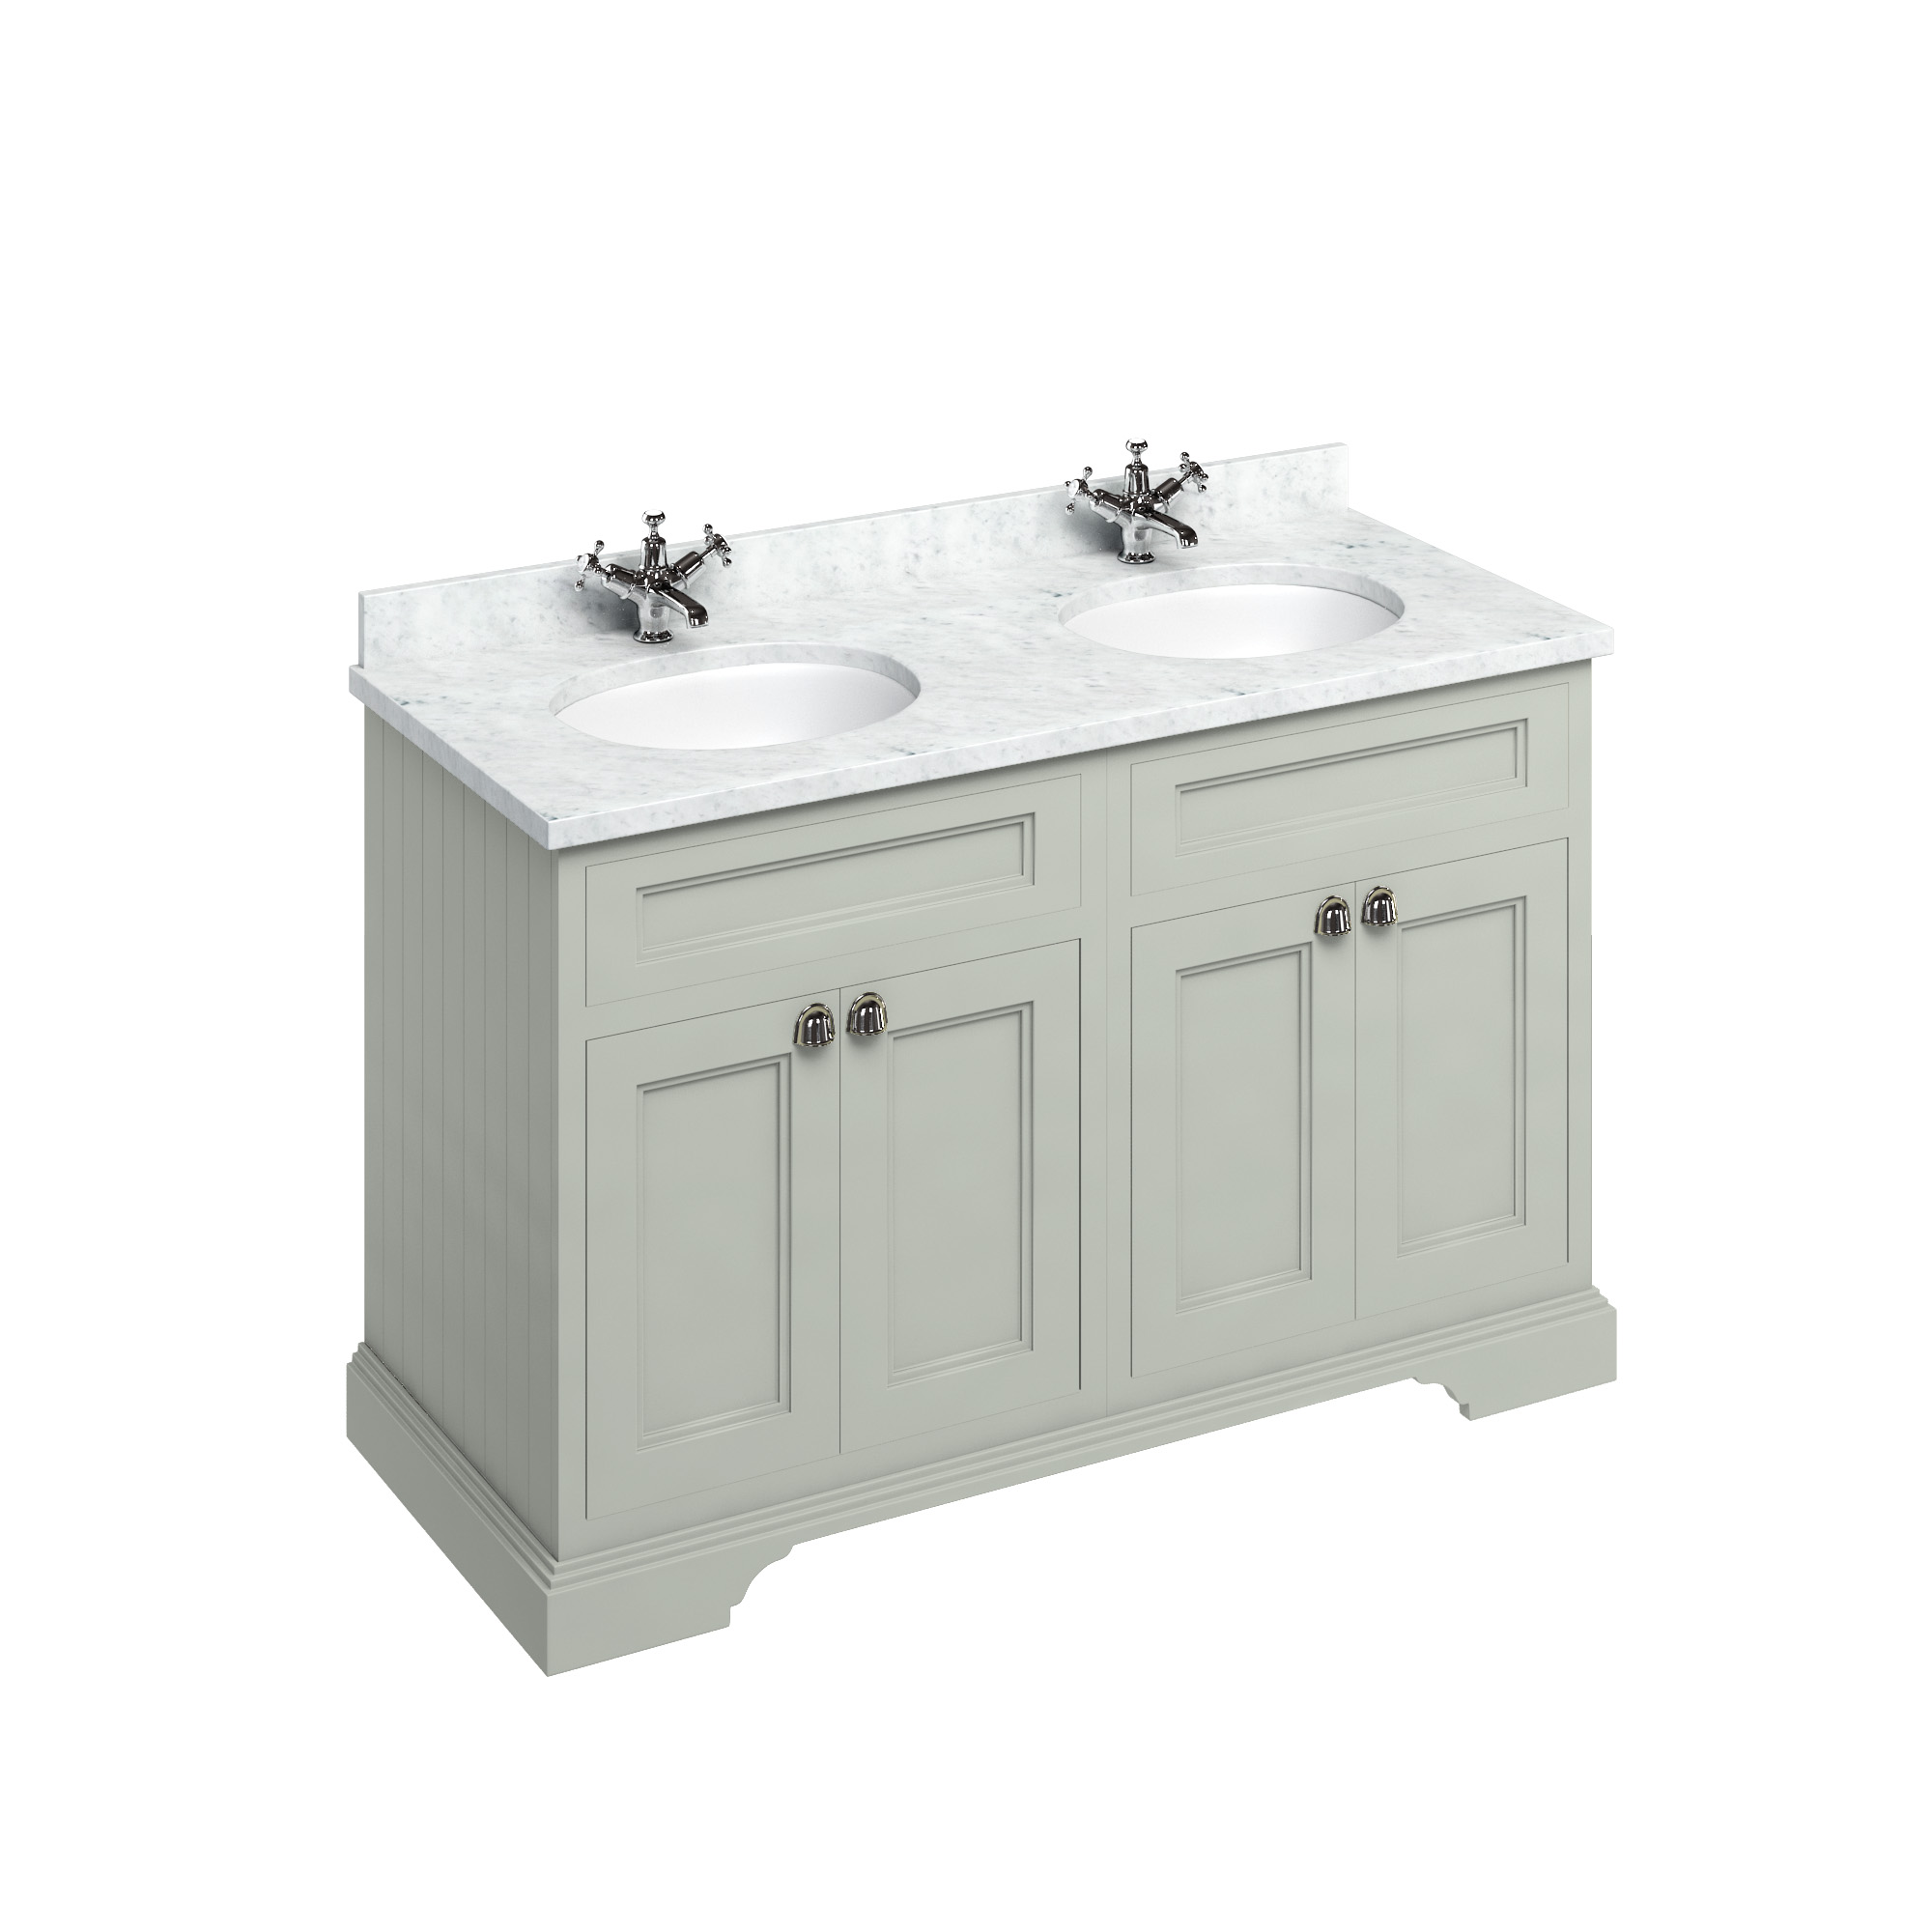 Freestanding 130 Vanity Unit with doors - Dark Olive and Minerva Carrara white worktop with two integrated white basins